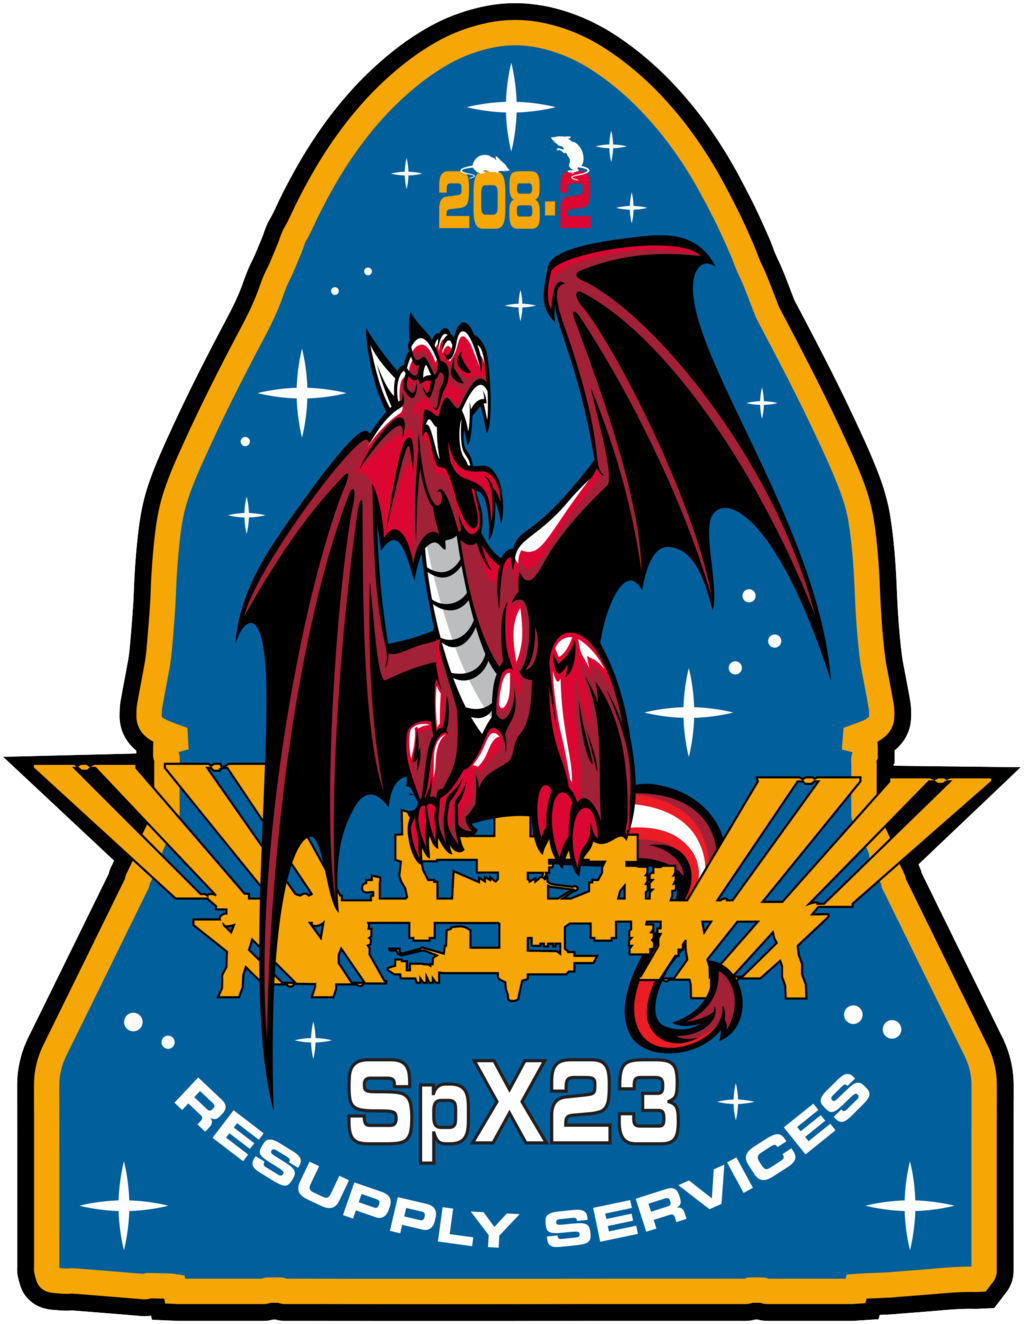 Mission patch for Dragon CRS-2 SpX-23